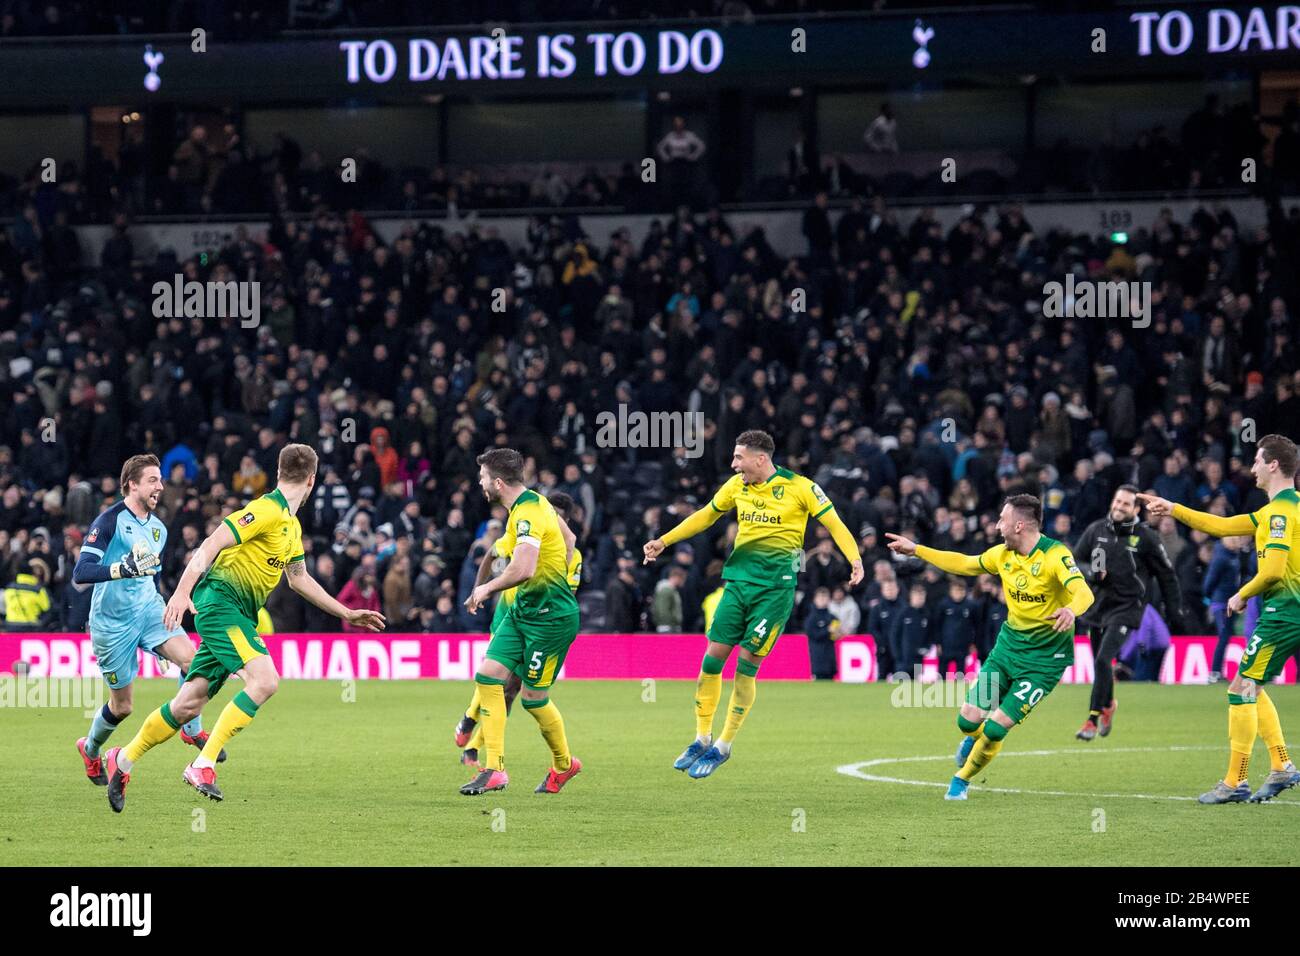 LONDON, ENGLAND - MARCH 04: Tim Krul, Emi Buemdia, Max Aarons, Grant Hanley, Jamal Lewis and Marco Stiepermann of Norwich City celebrate during the FA Stock Photo